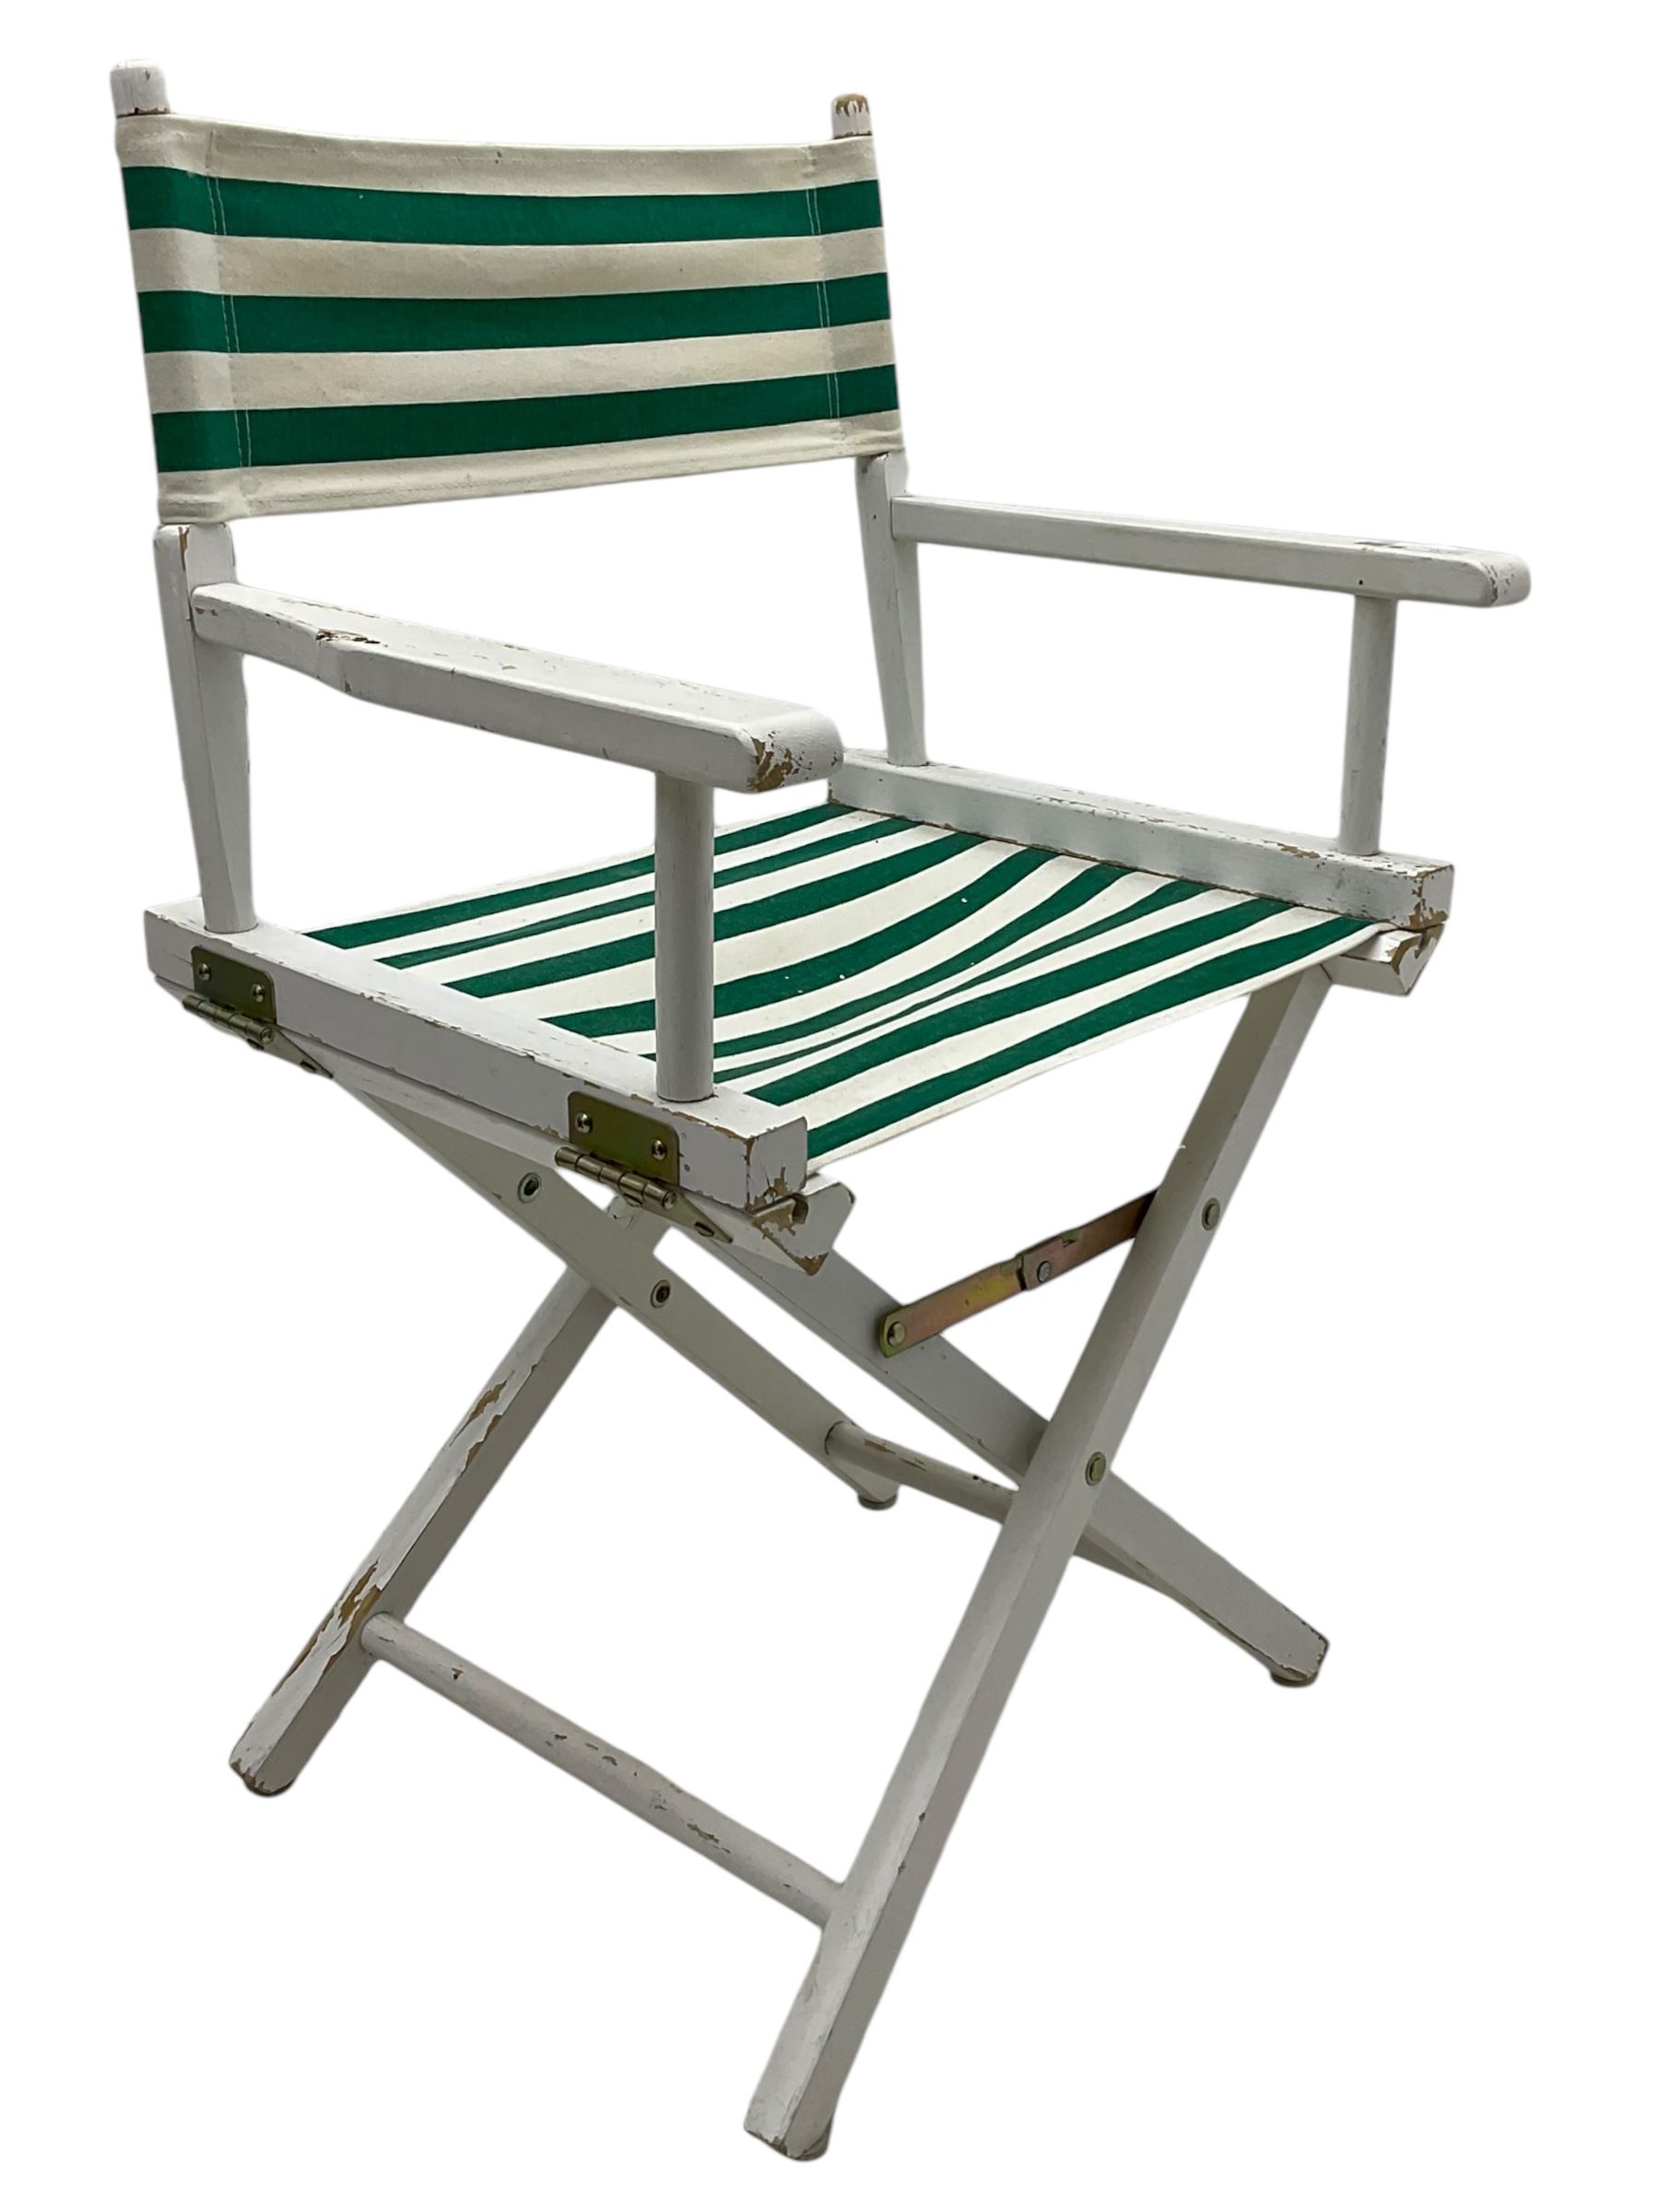 White painted folding director's chair